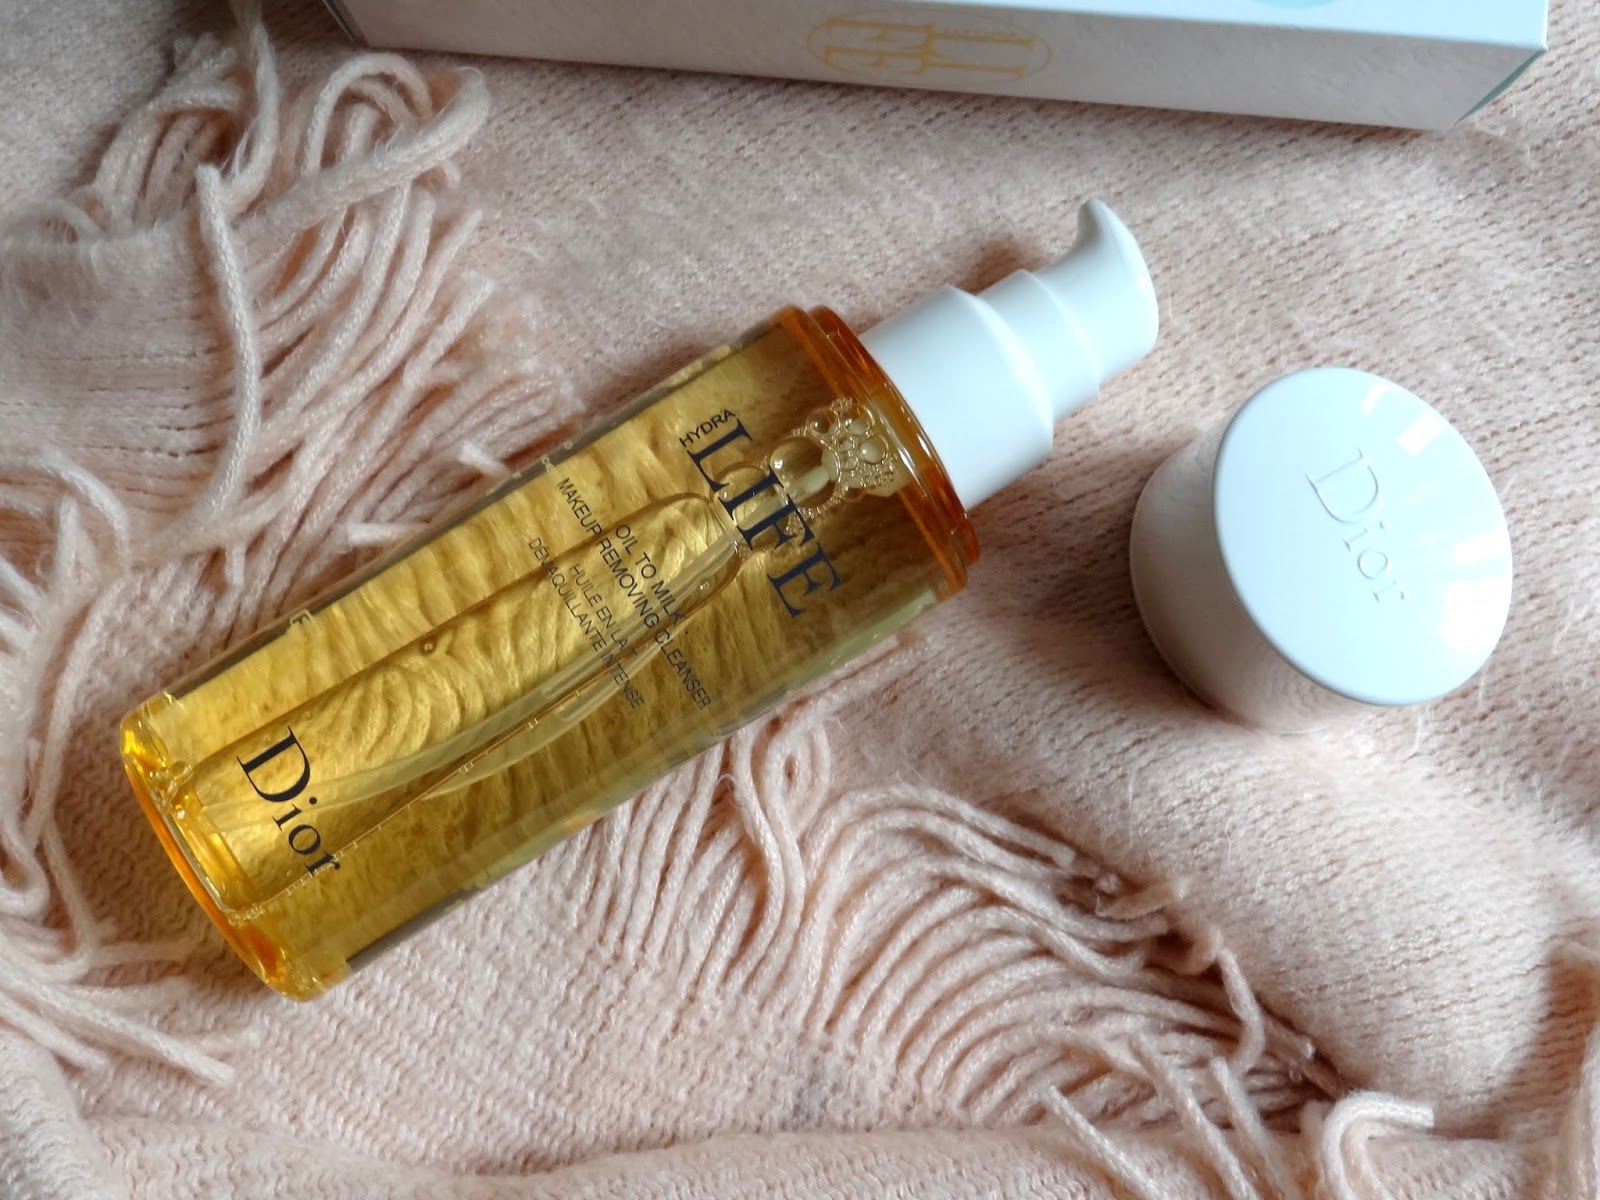 dior cleansing oil